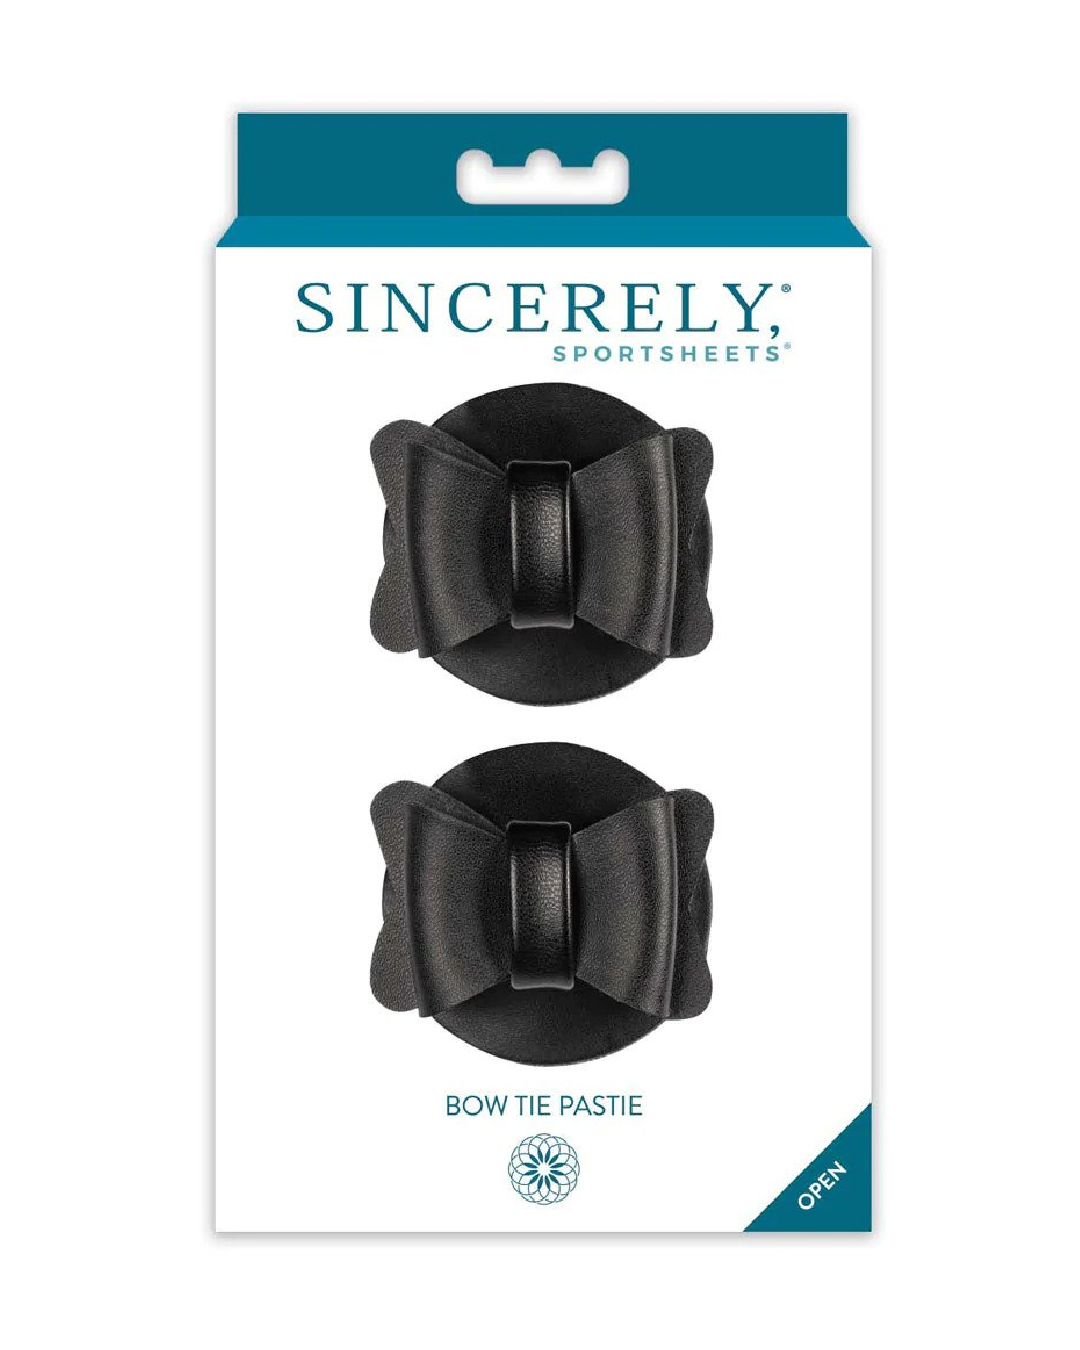 Sincerely Bow Tie Pasties in box